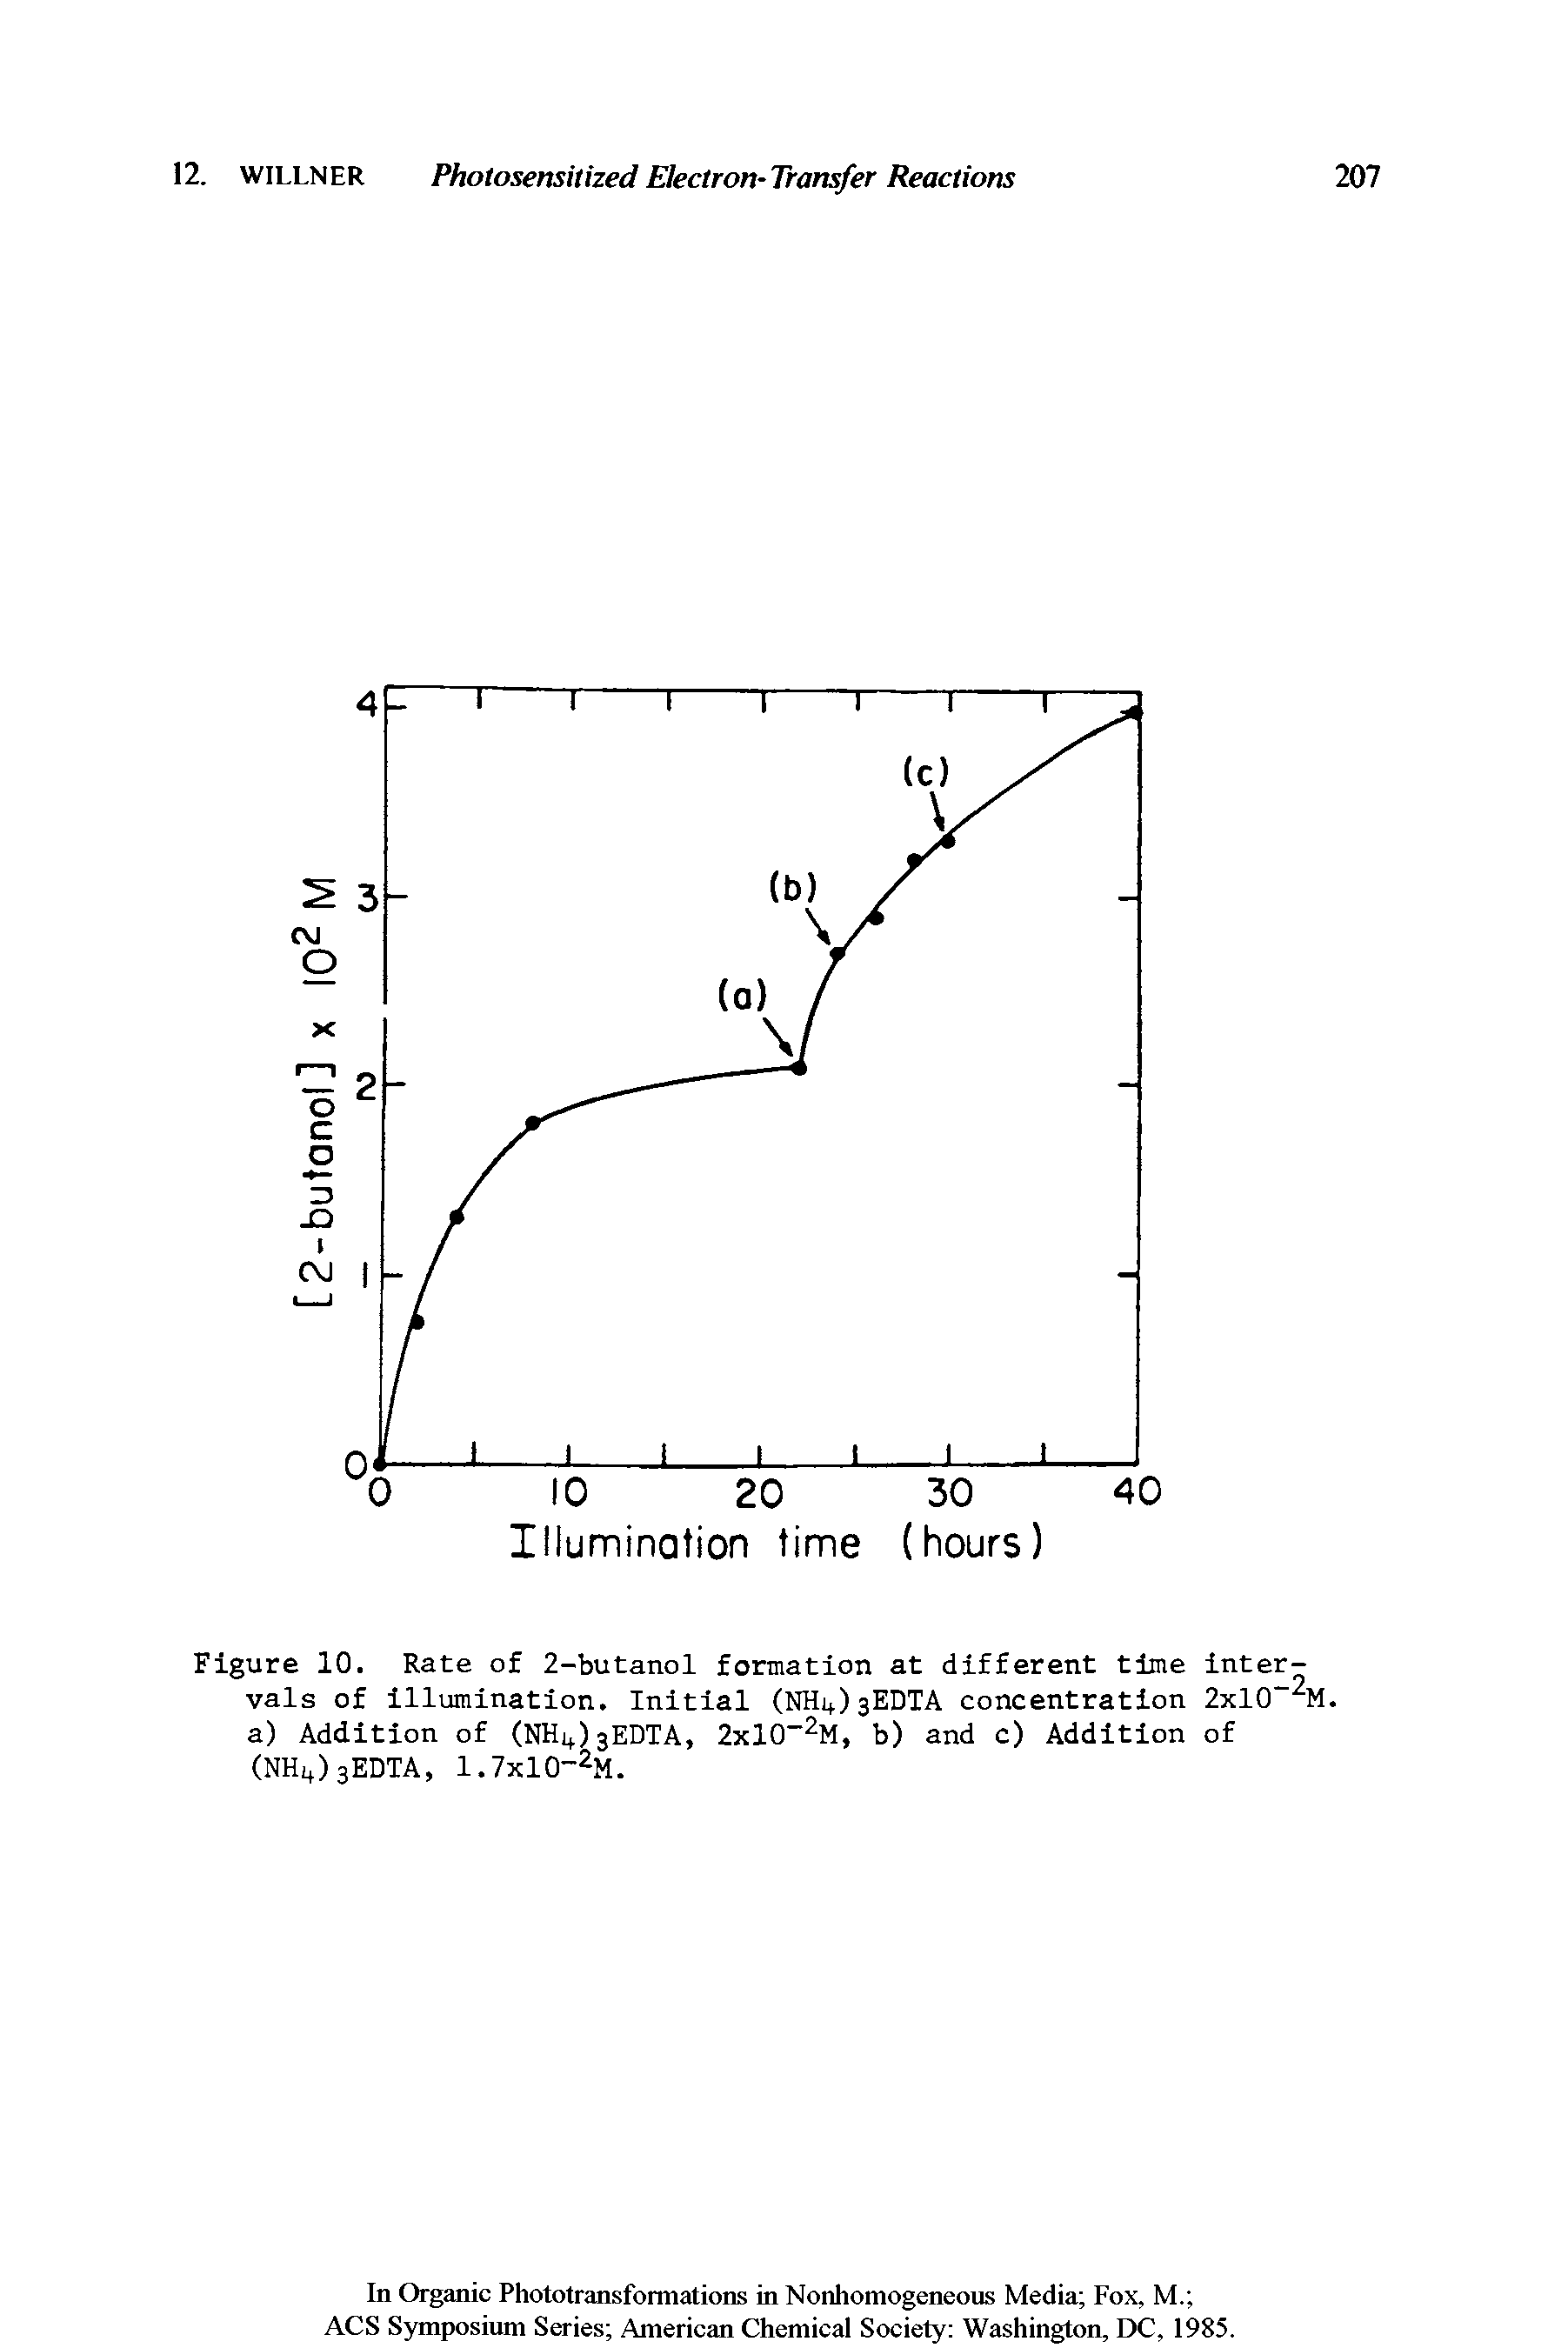 Figure 10. Rate of 2-butanol formation at different time intervals of illumination. Initial (NHi+ EDTA concentration 2xlO 2M. a) Addition of (NH4)3EDTA, 2xlO-2M, b) and c) Addition of (NHit)3EDTA, 1.7x10 2M.